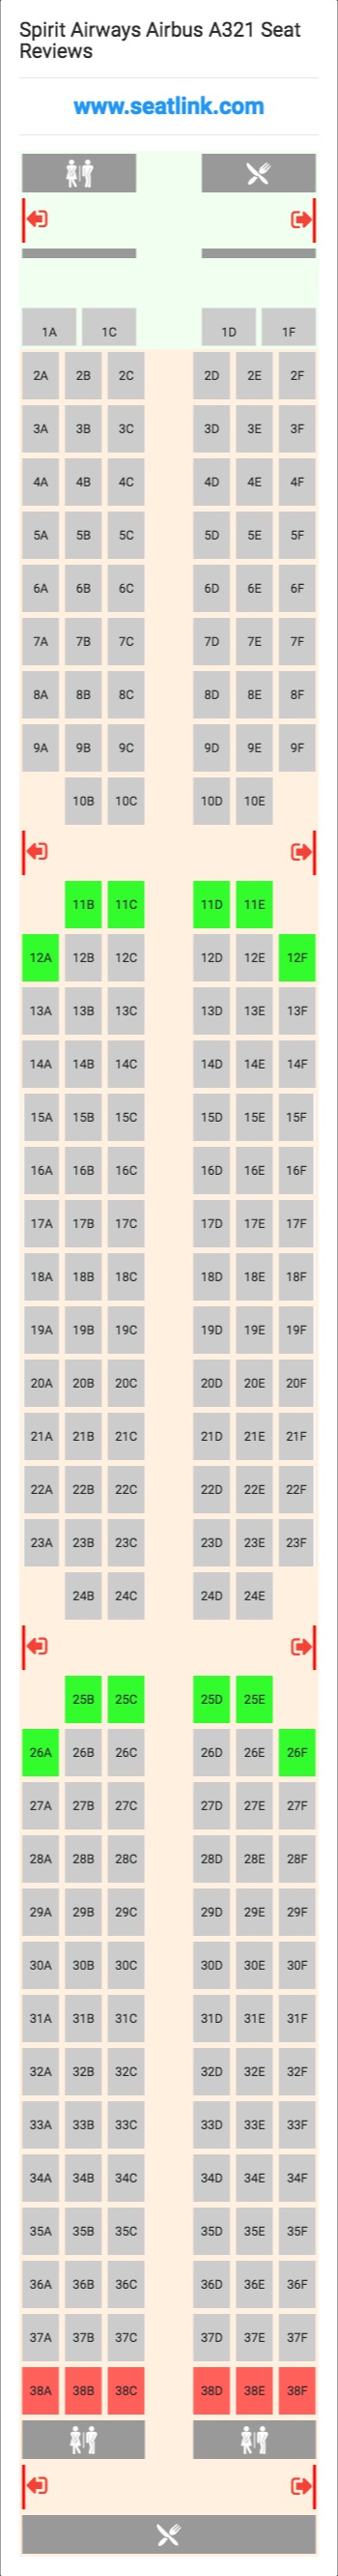 Spirit Airlines Airplane Seating Chart